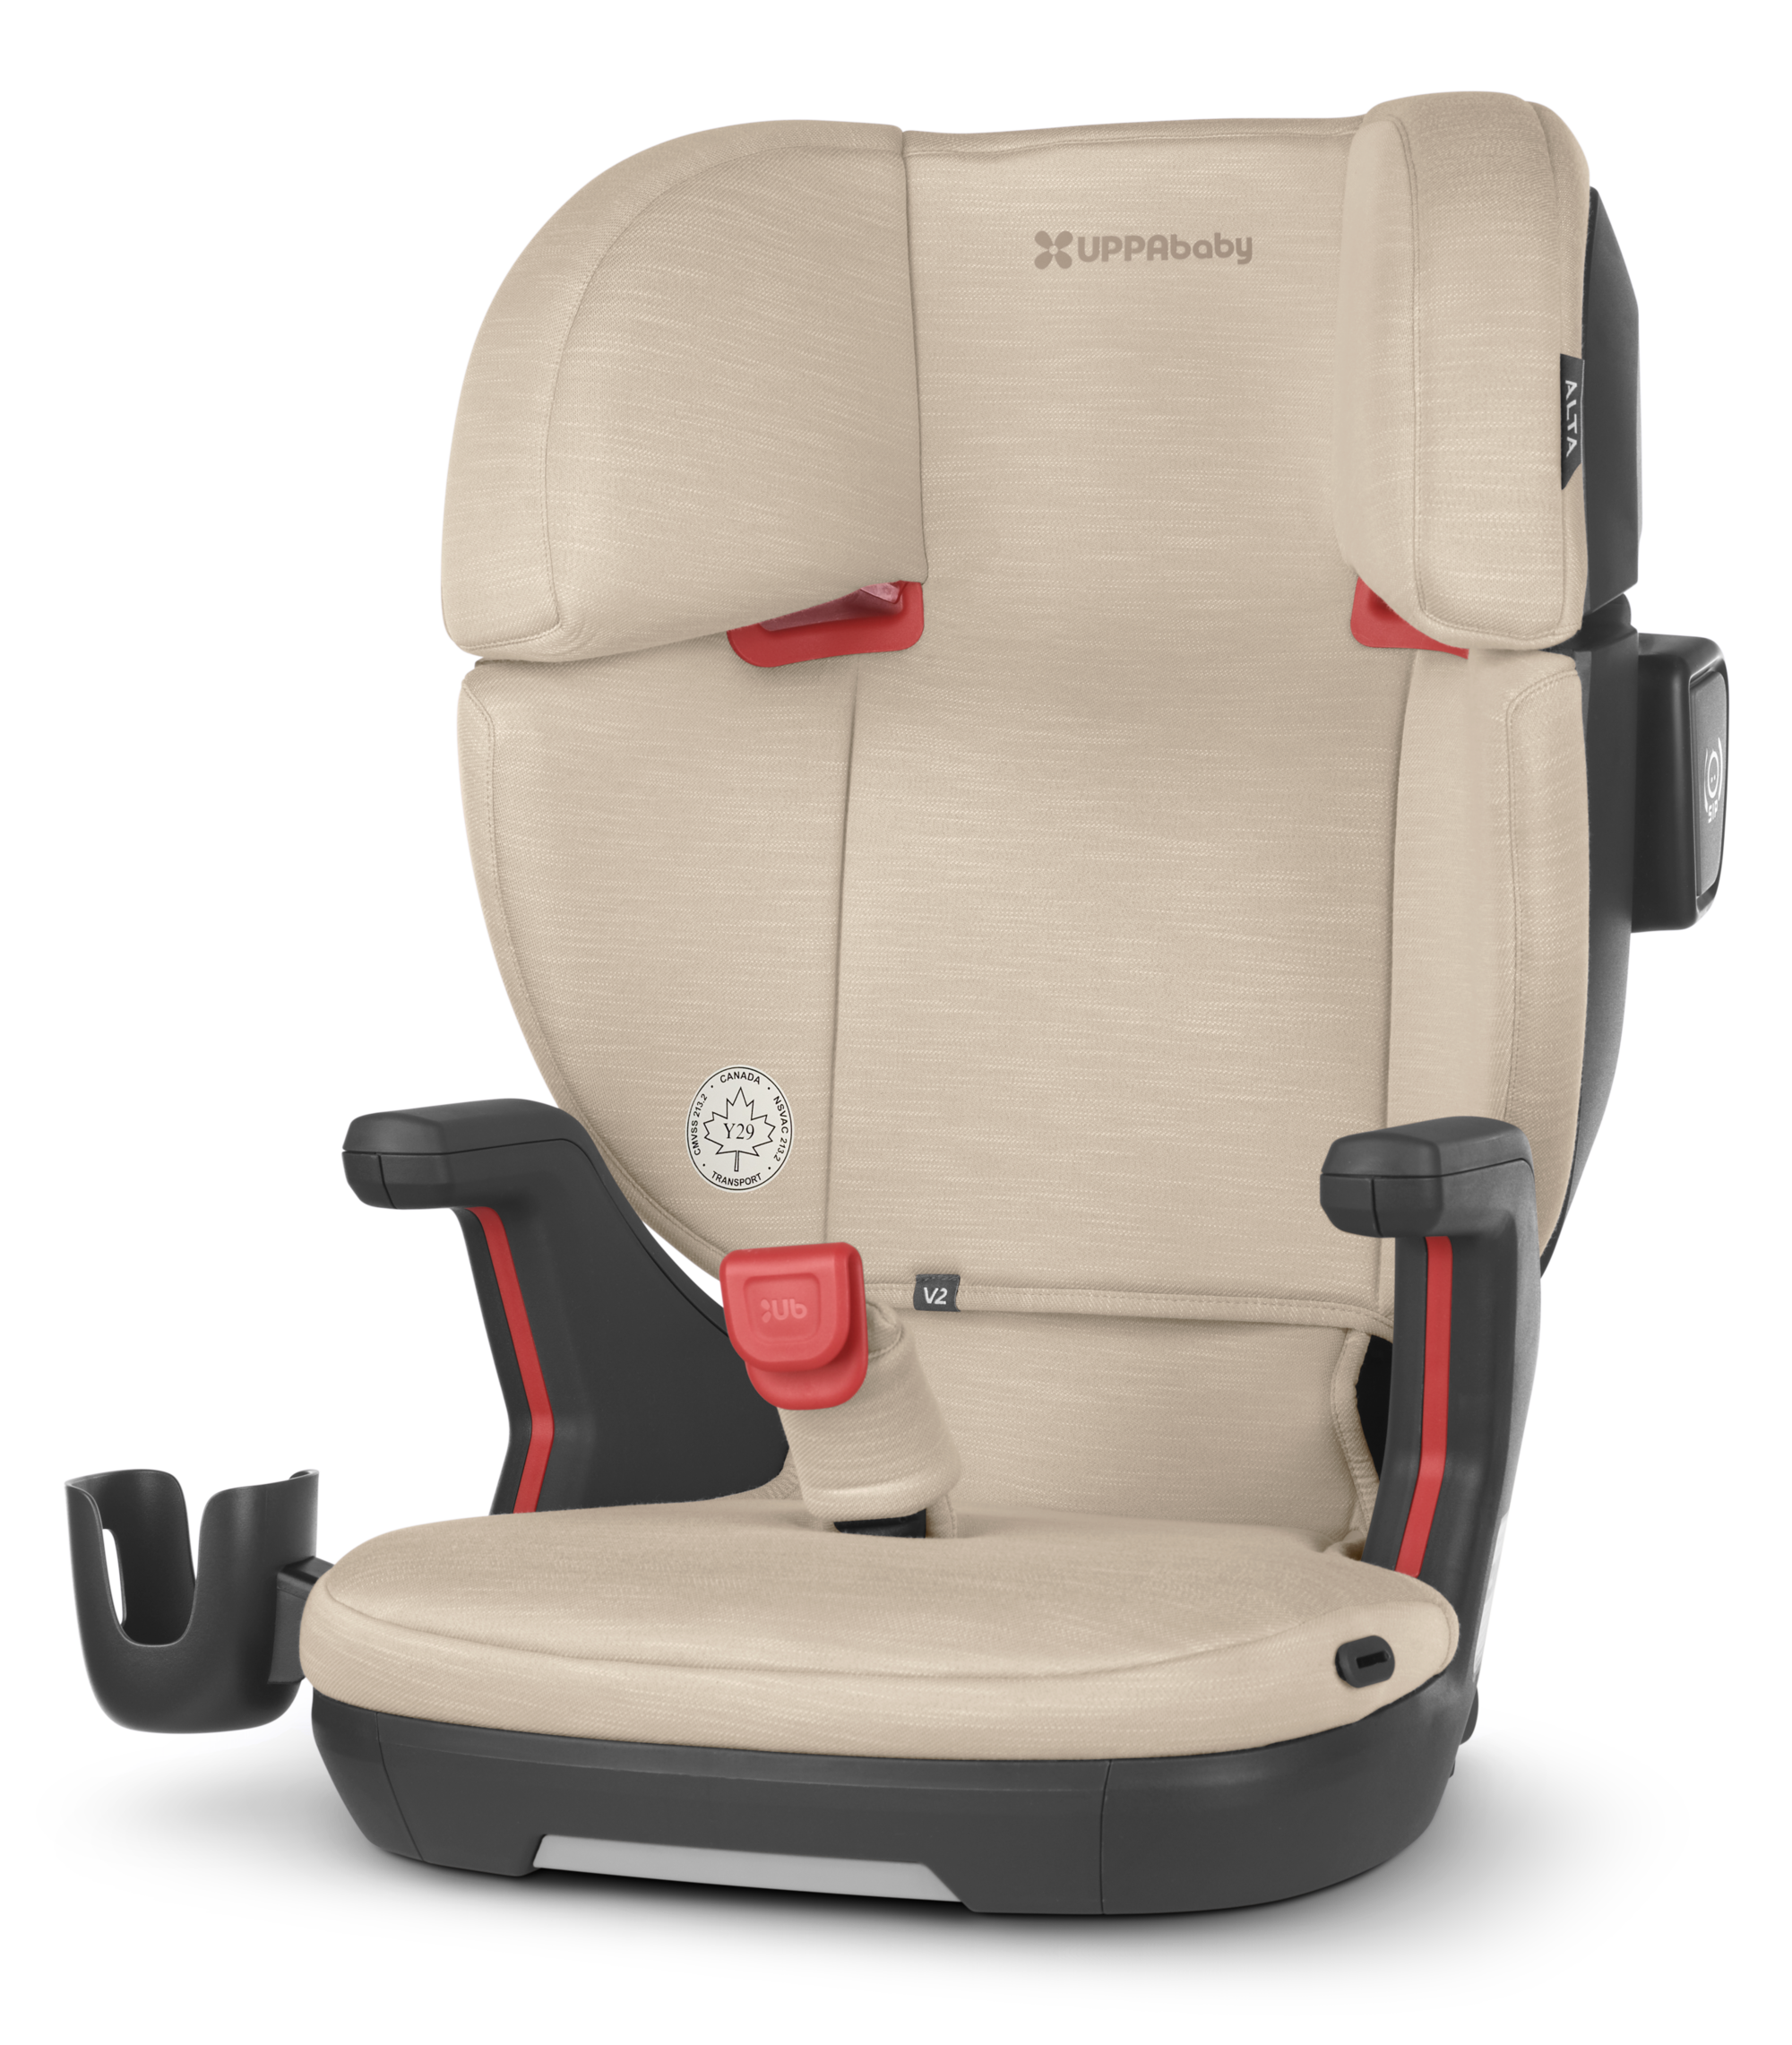 Greyson - UPPAbaby Alta V2 High-Back Booster Seat